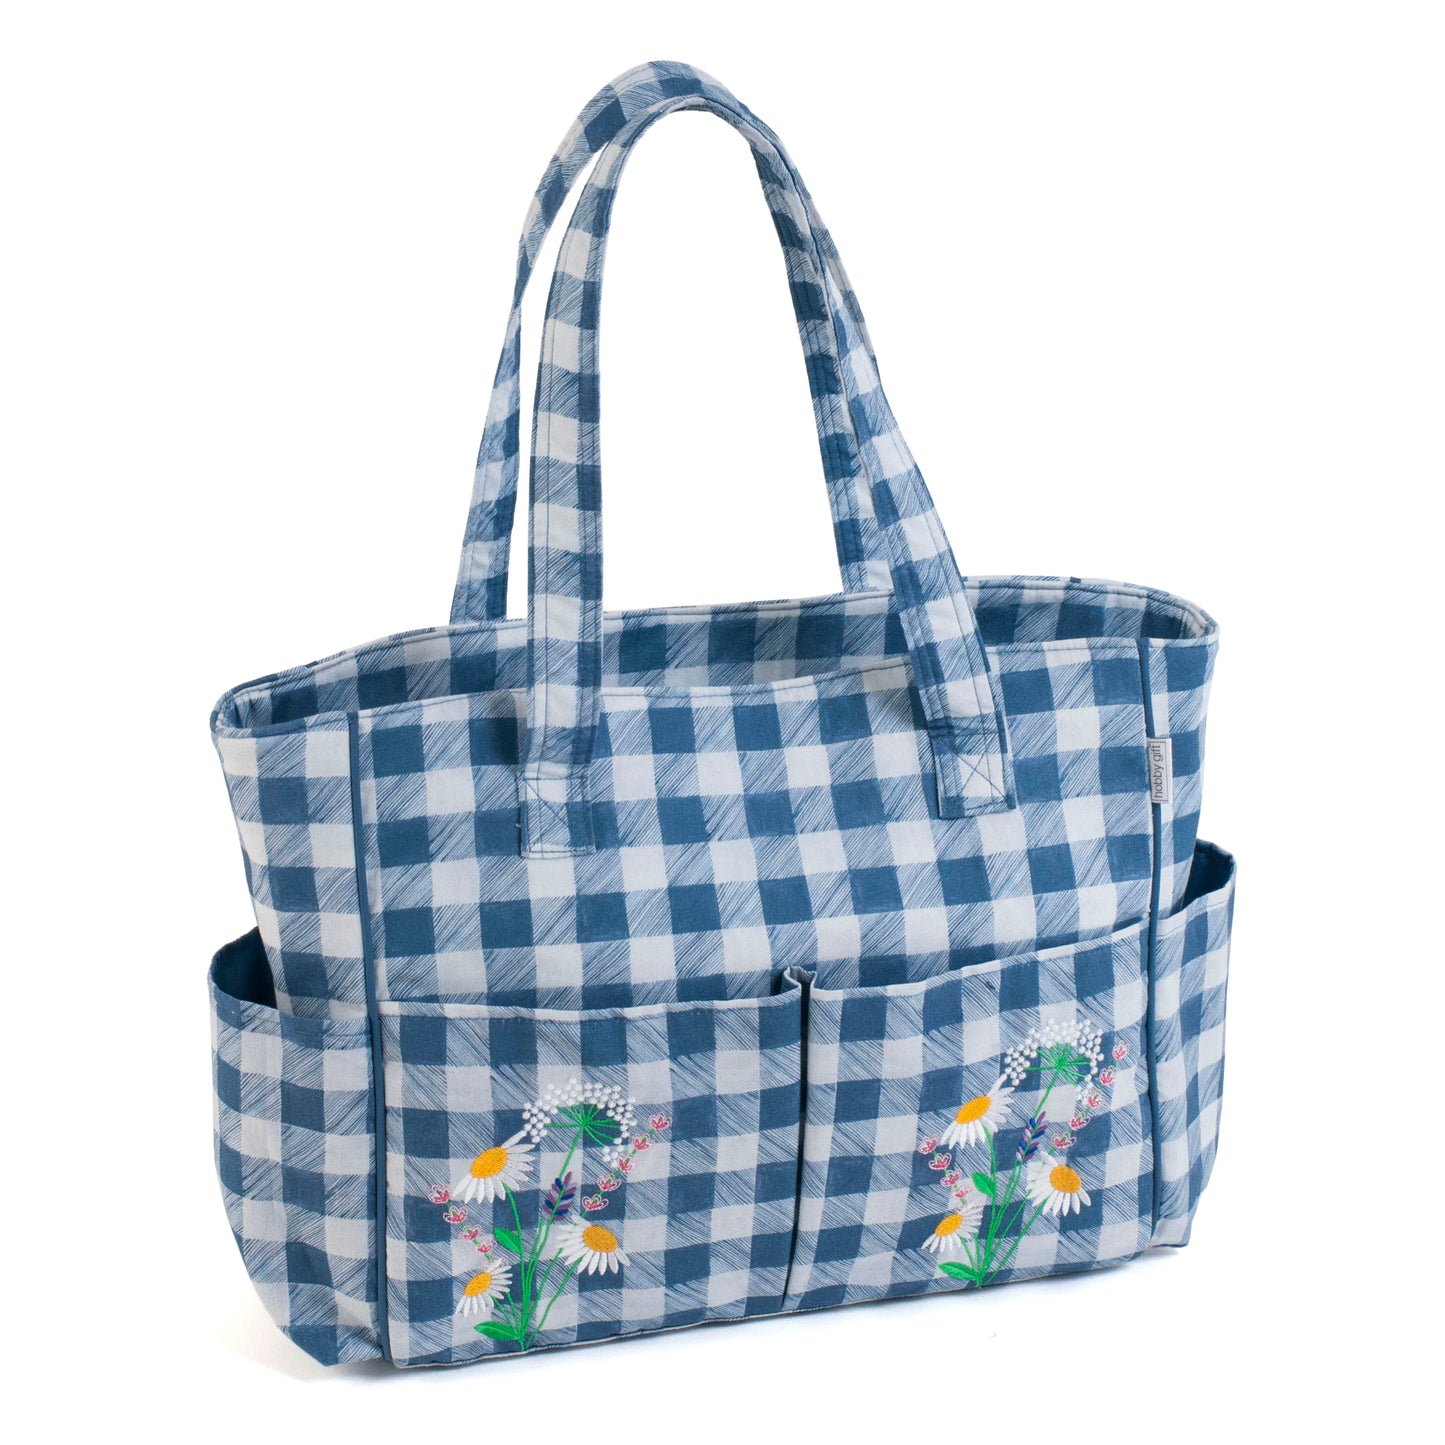 Hobby Gift Craft Bag Embroidered Wild Floral Plaid